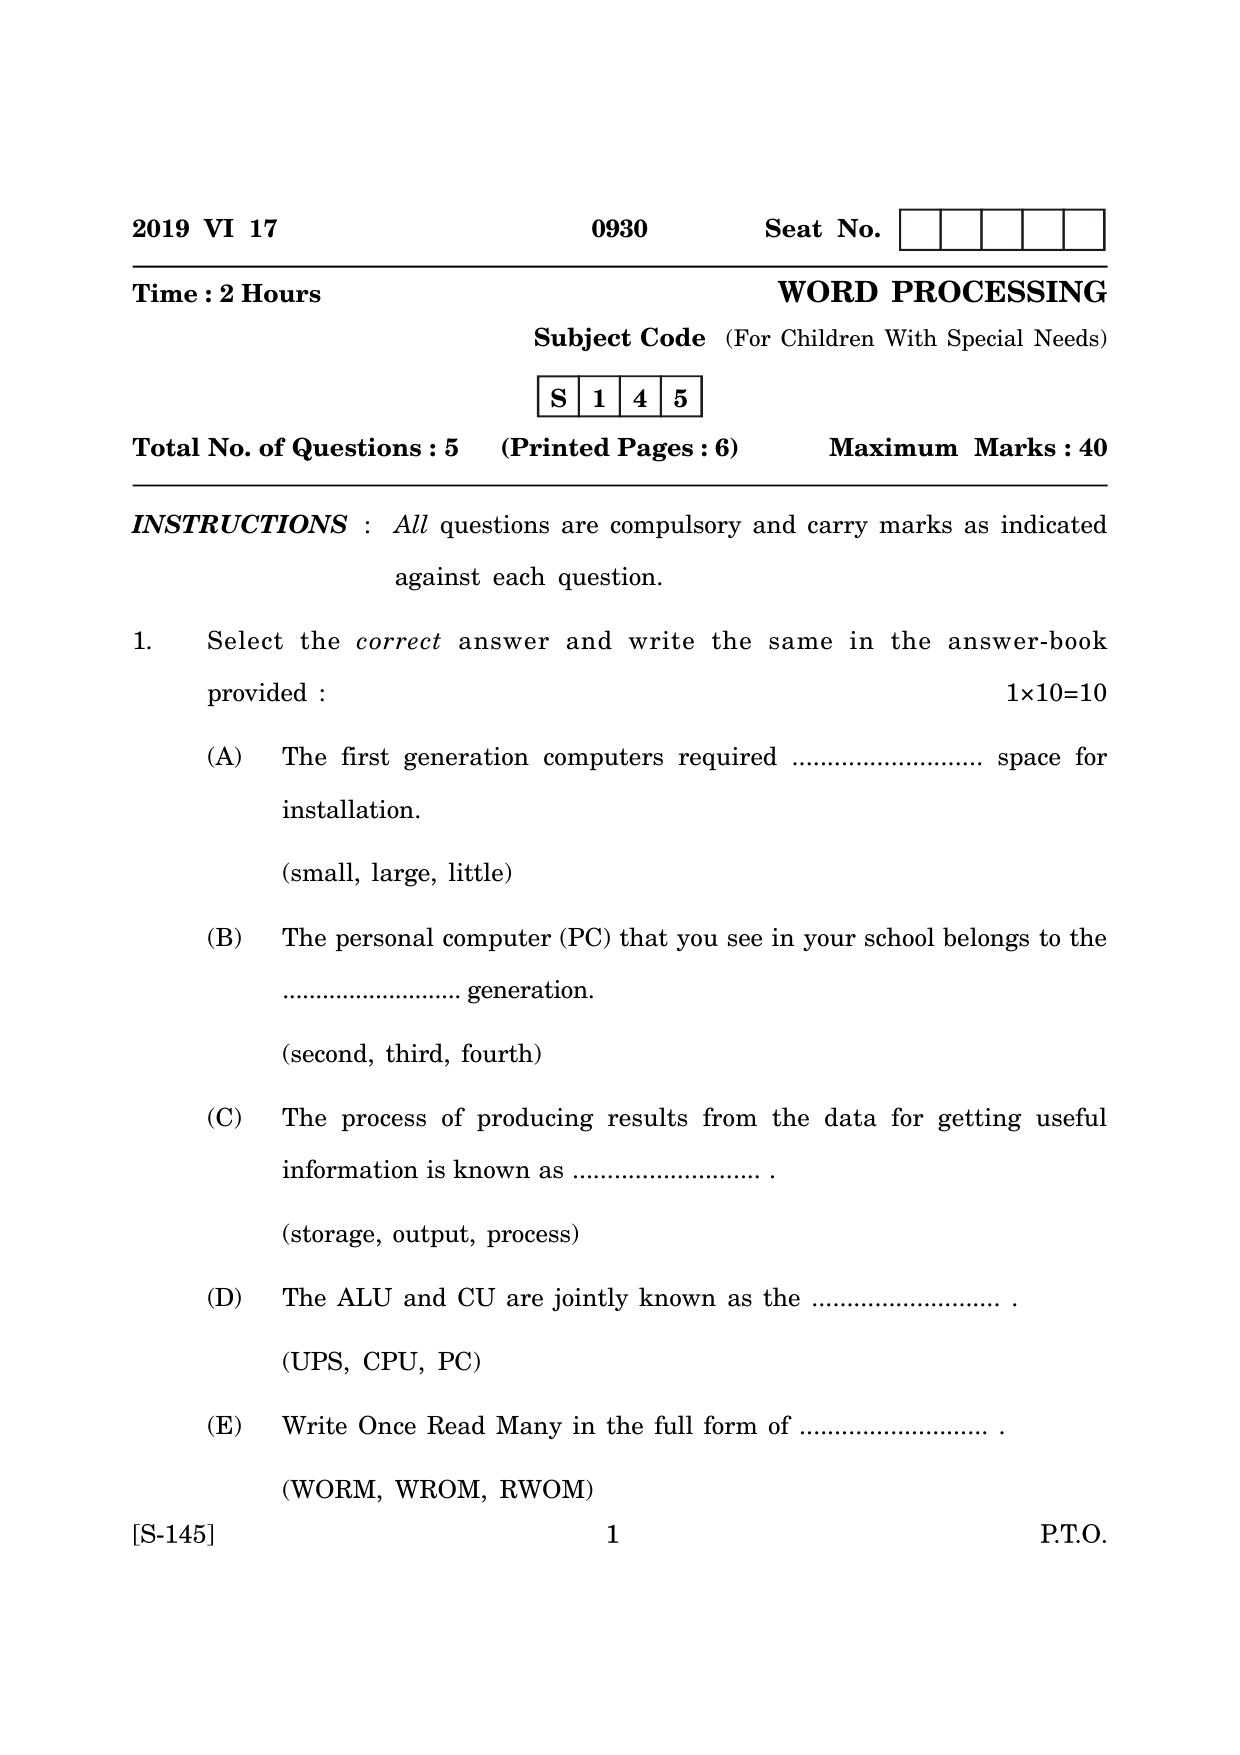 Goa Board Class 10 Word Processing  (June 2019) Question Paper - Page 1